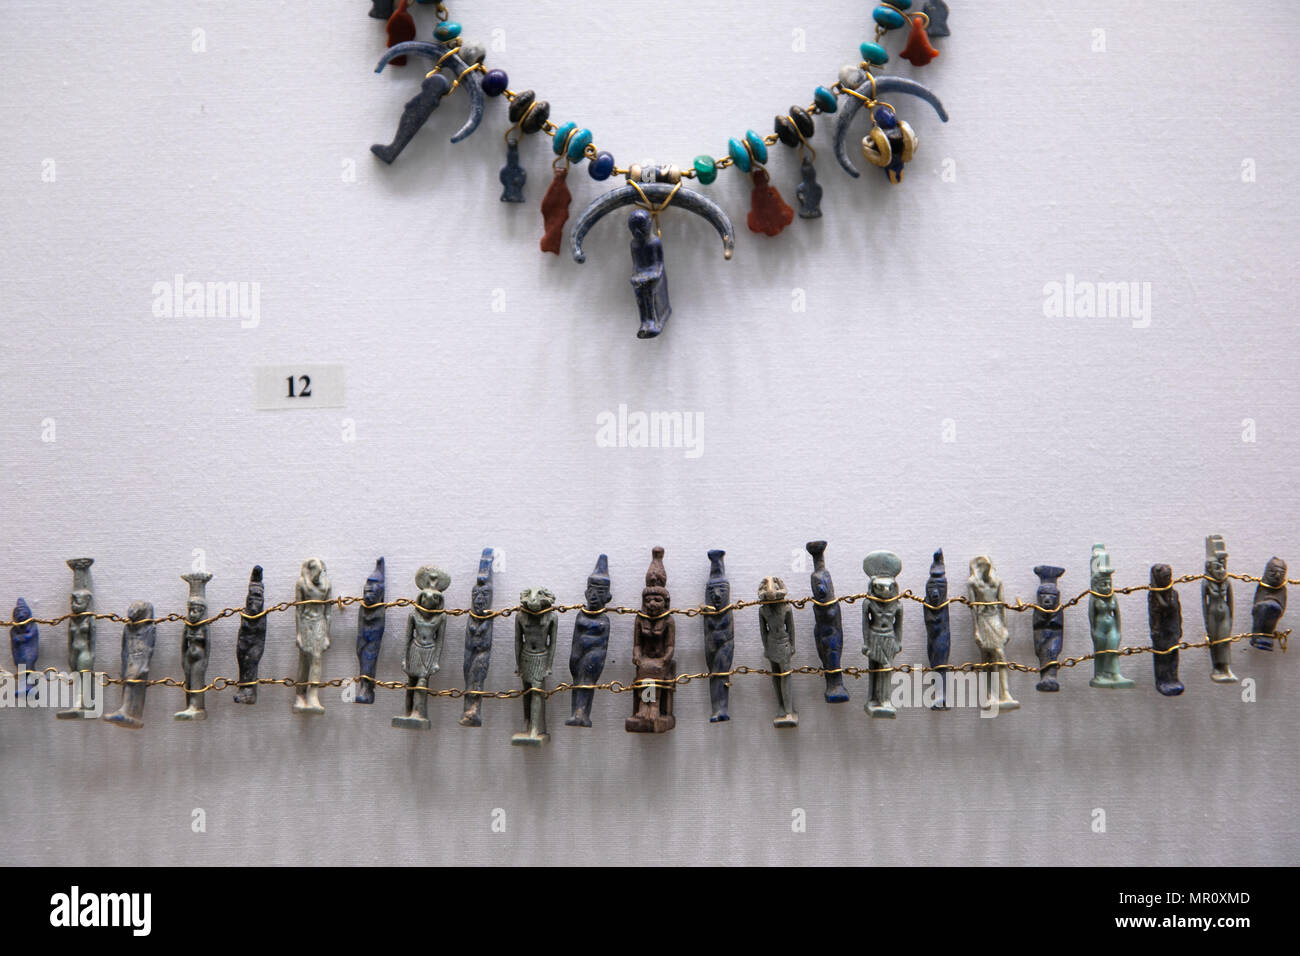 Athens. 23rd May, 2018. Picture taken on May 23, 2018 shows ancient jewels displayed at the National Archaeological Museum in Athens, Greece. Located in the center of Athens, the National Archaeological Museum houses more than 20,000 exhibits, including the world's finest collection of Greek antiquities. Credit: Lefteris Partsalis/Xinhua/Alamy Live News Stock Photo